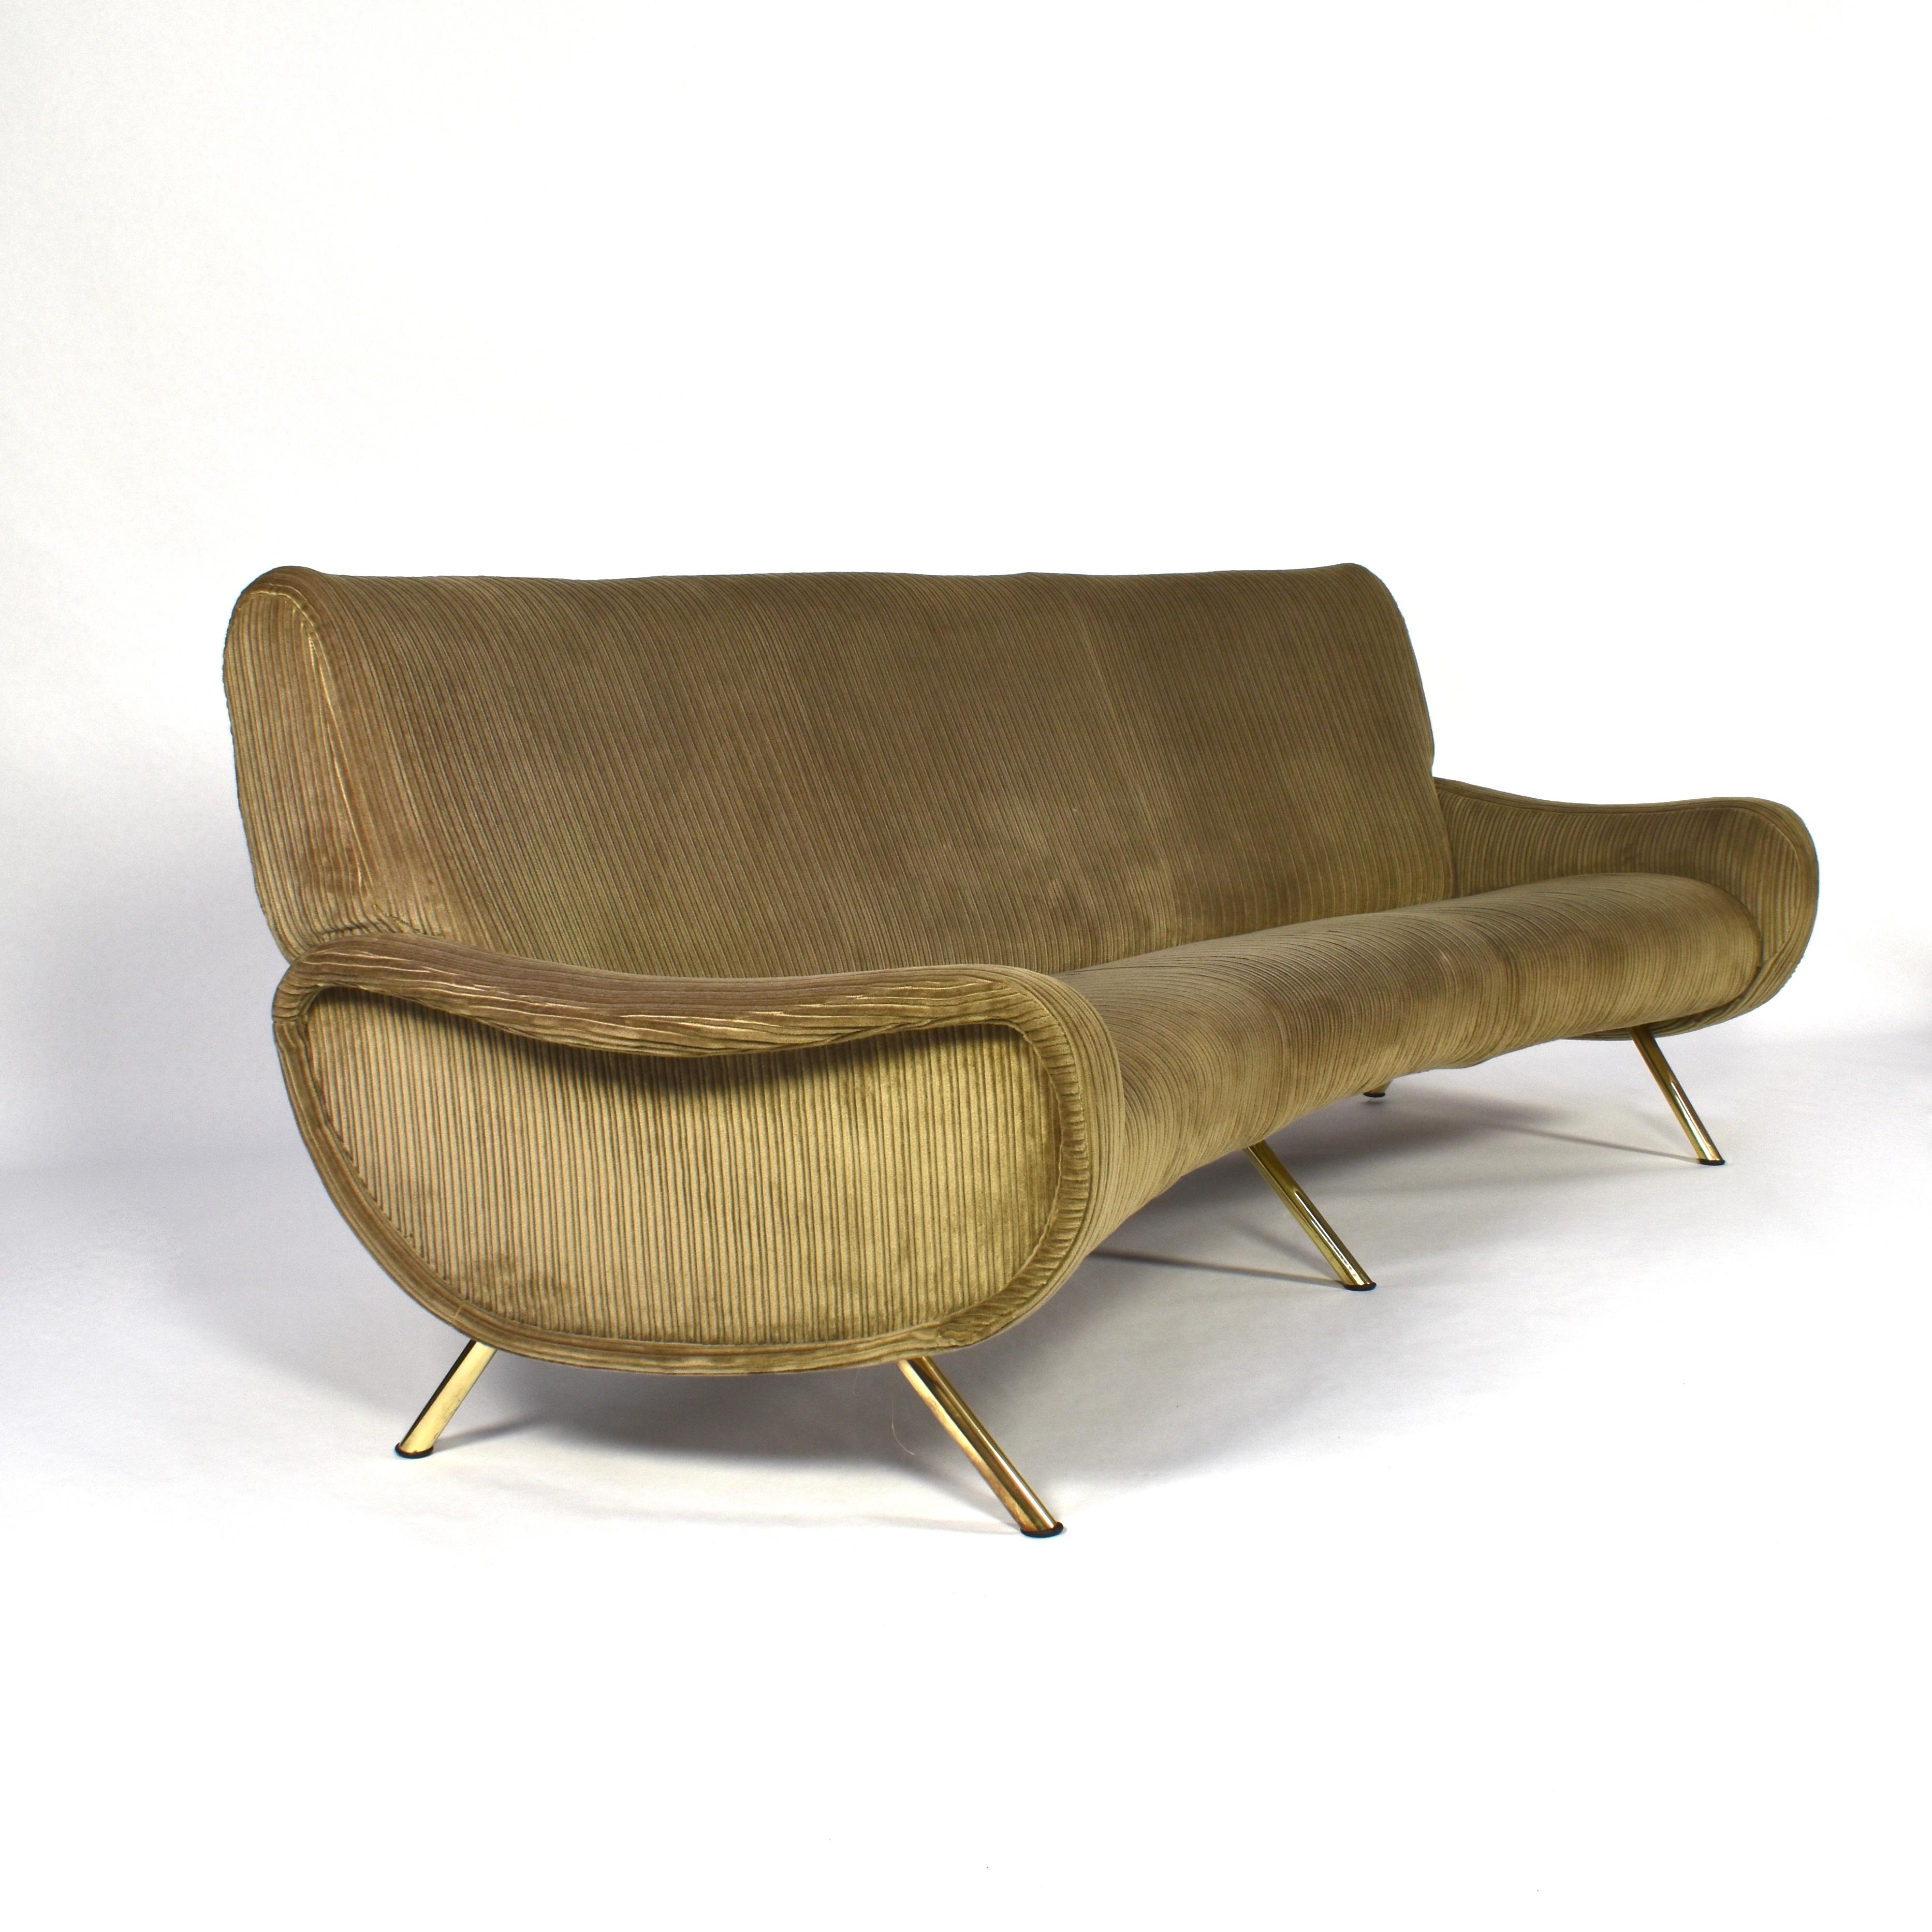 Rare and exclusive curved sofa by Marco Zanuso for Arflex, Italy, 1951. The sofa still has its original green rib corduroy velvet fabric and features brass legs. The sofa does not need to be reupholstered but is open for customization: the sofa can